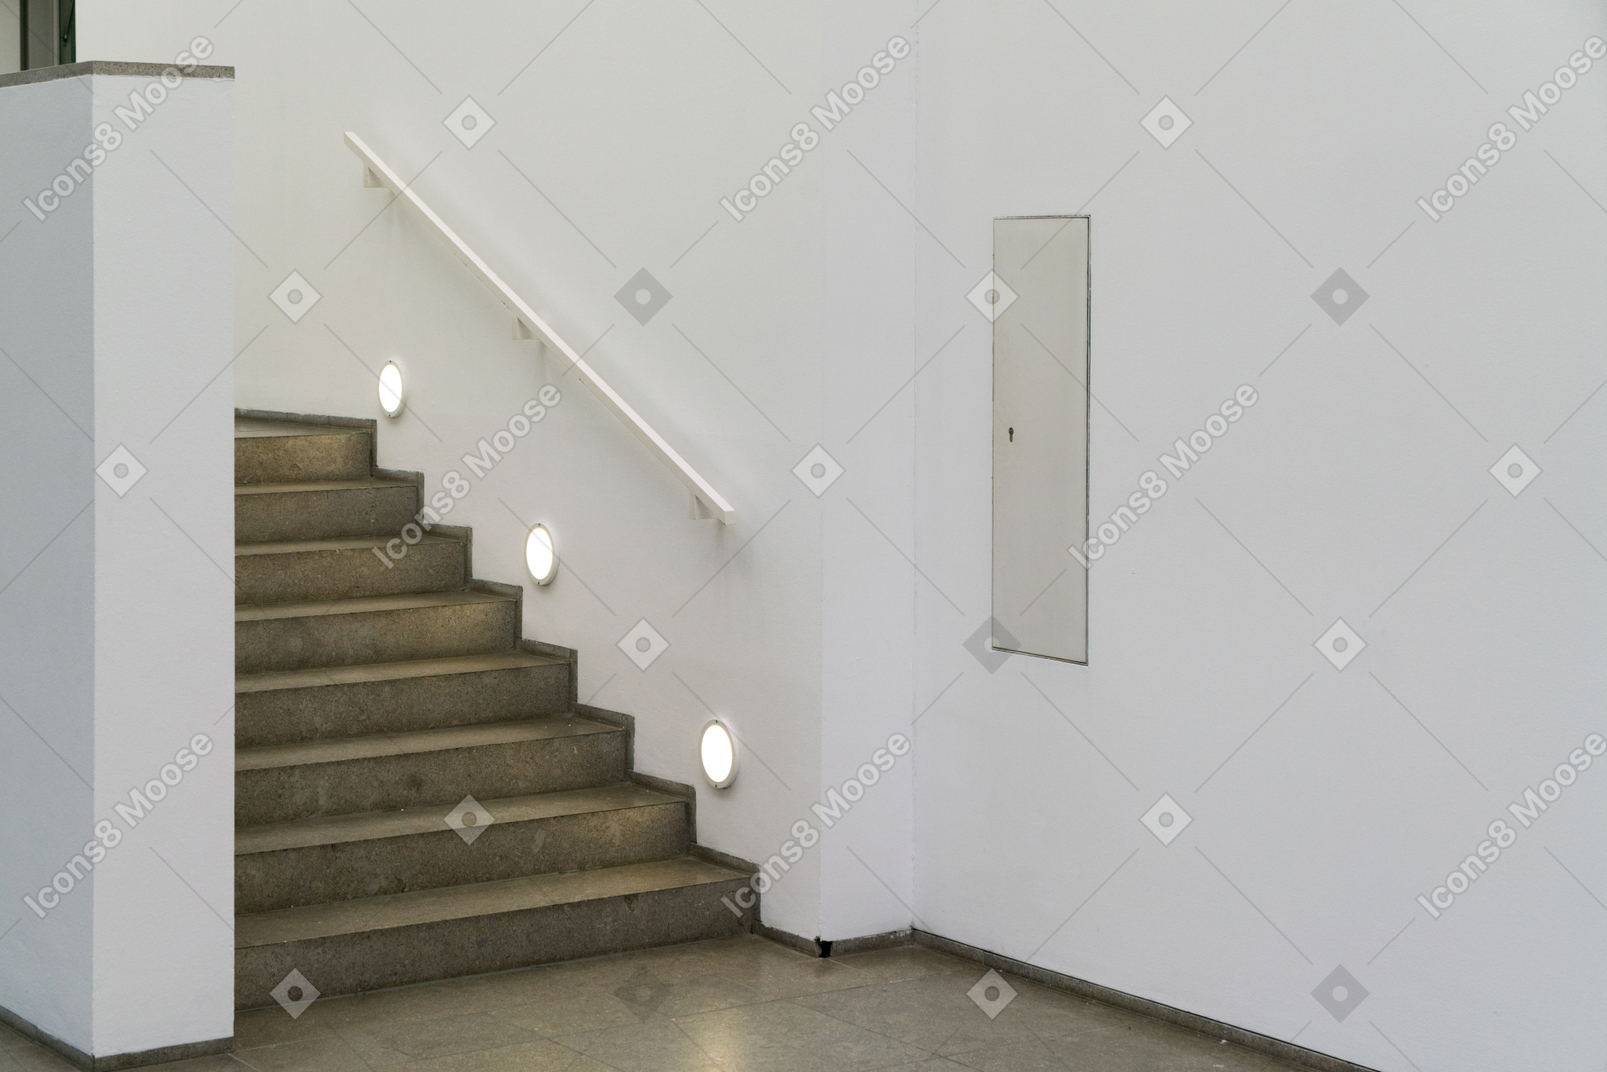 Staircase lighting in a white hallway